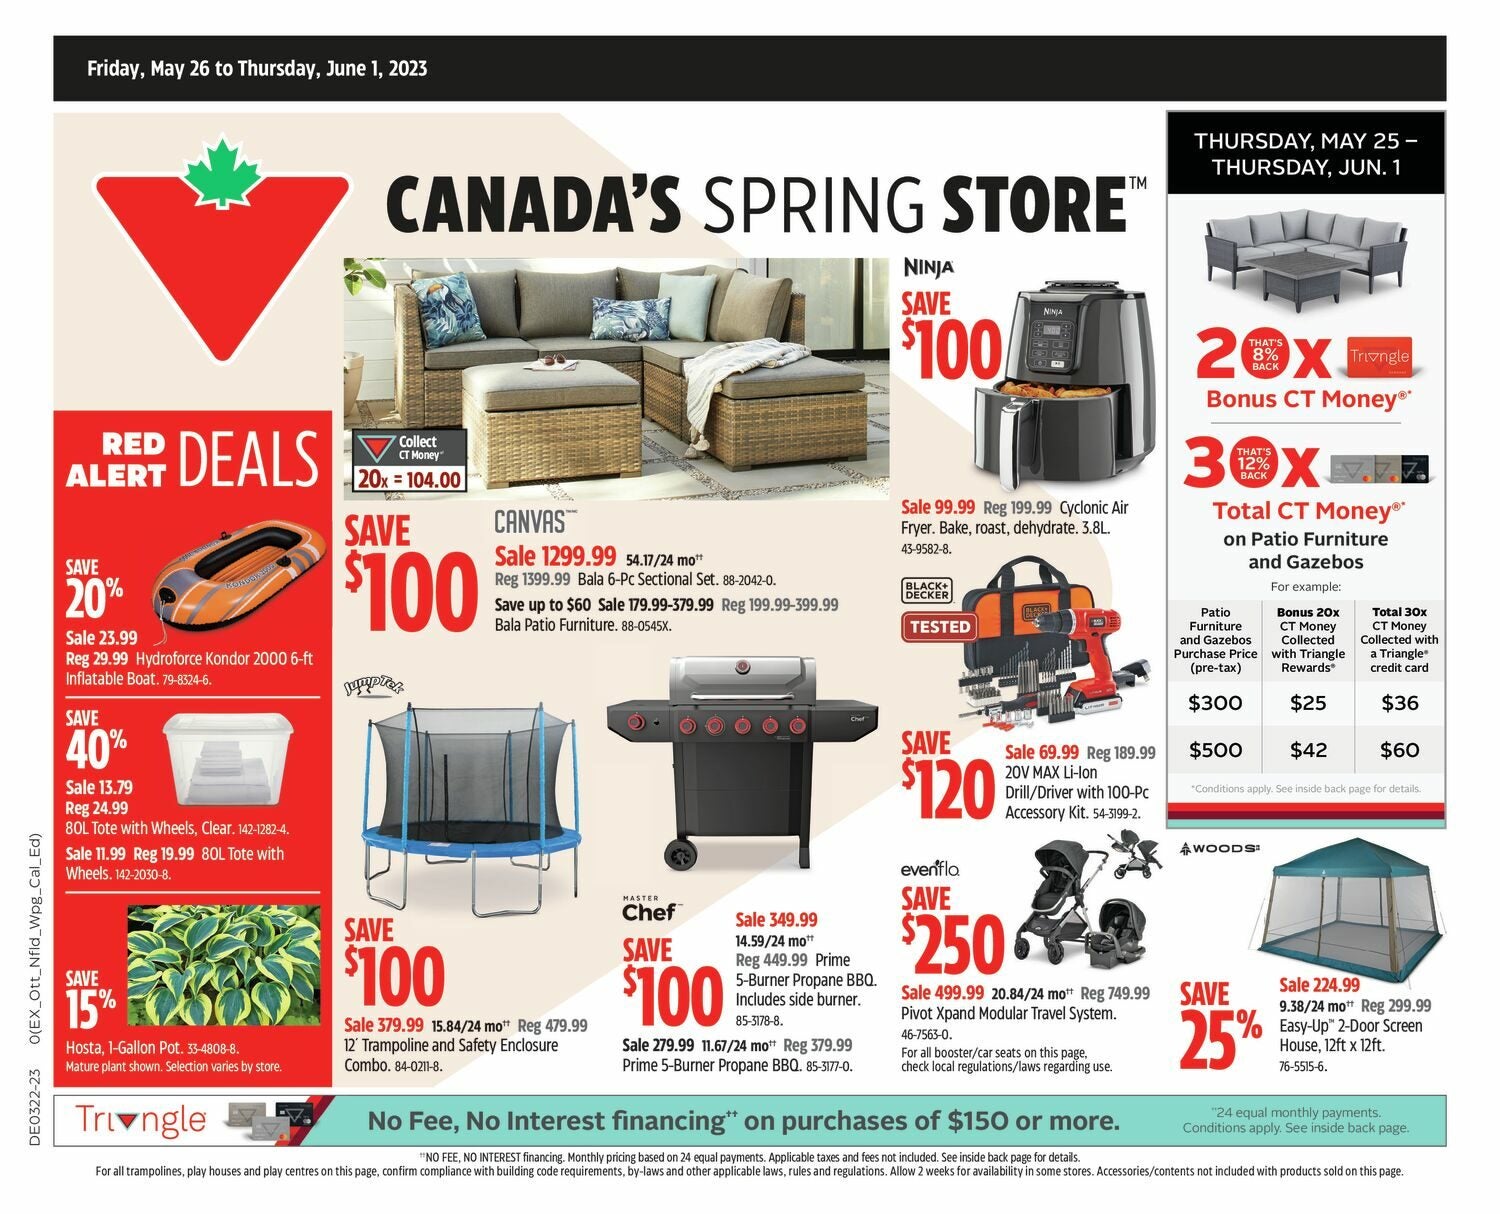 Handi-Foil Selected Foil, Air Fryer Liners and Reusable Cooking Mat, Canadian Tire deals this week, Canadian Tire flyer